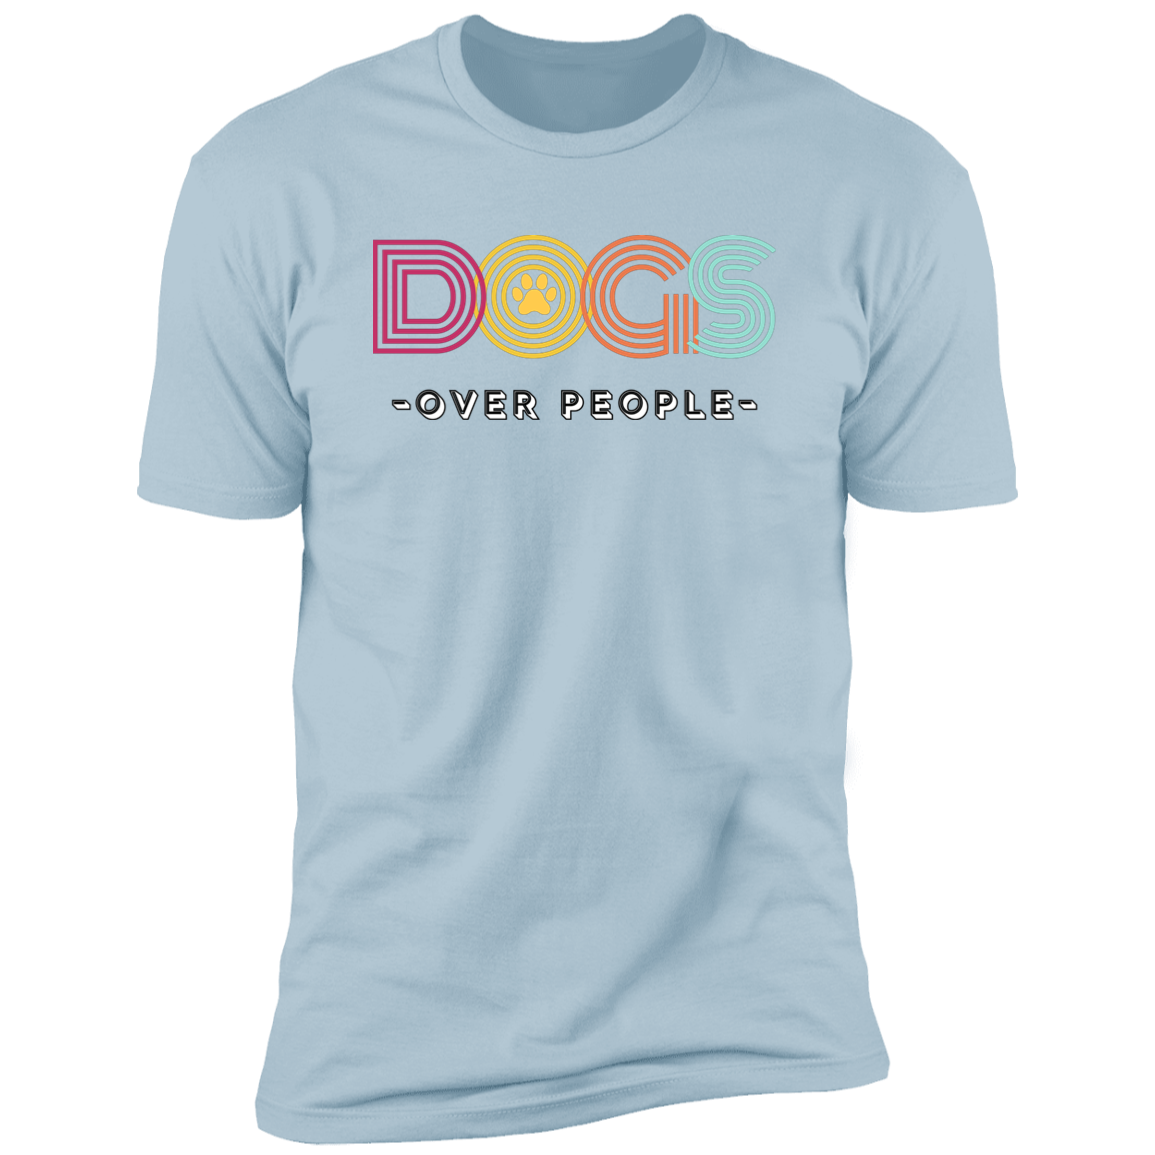 Dogs Over People t-shirt, funny dog shirt for humans, in light blue